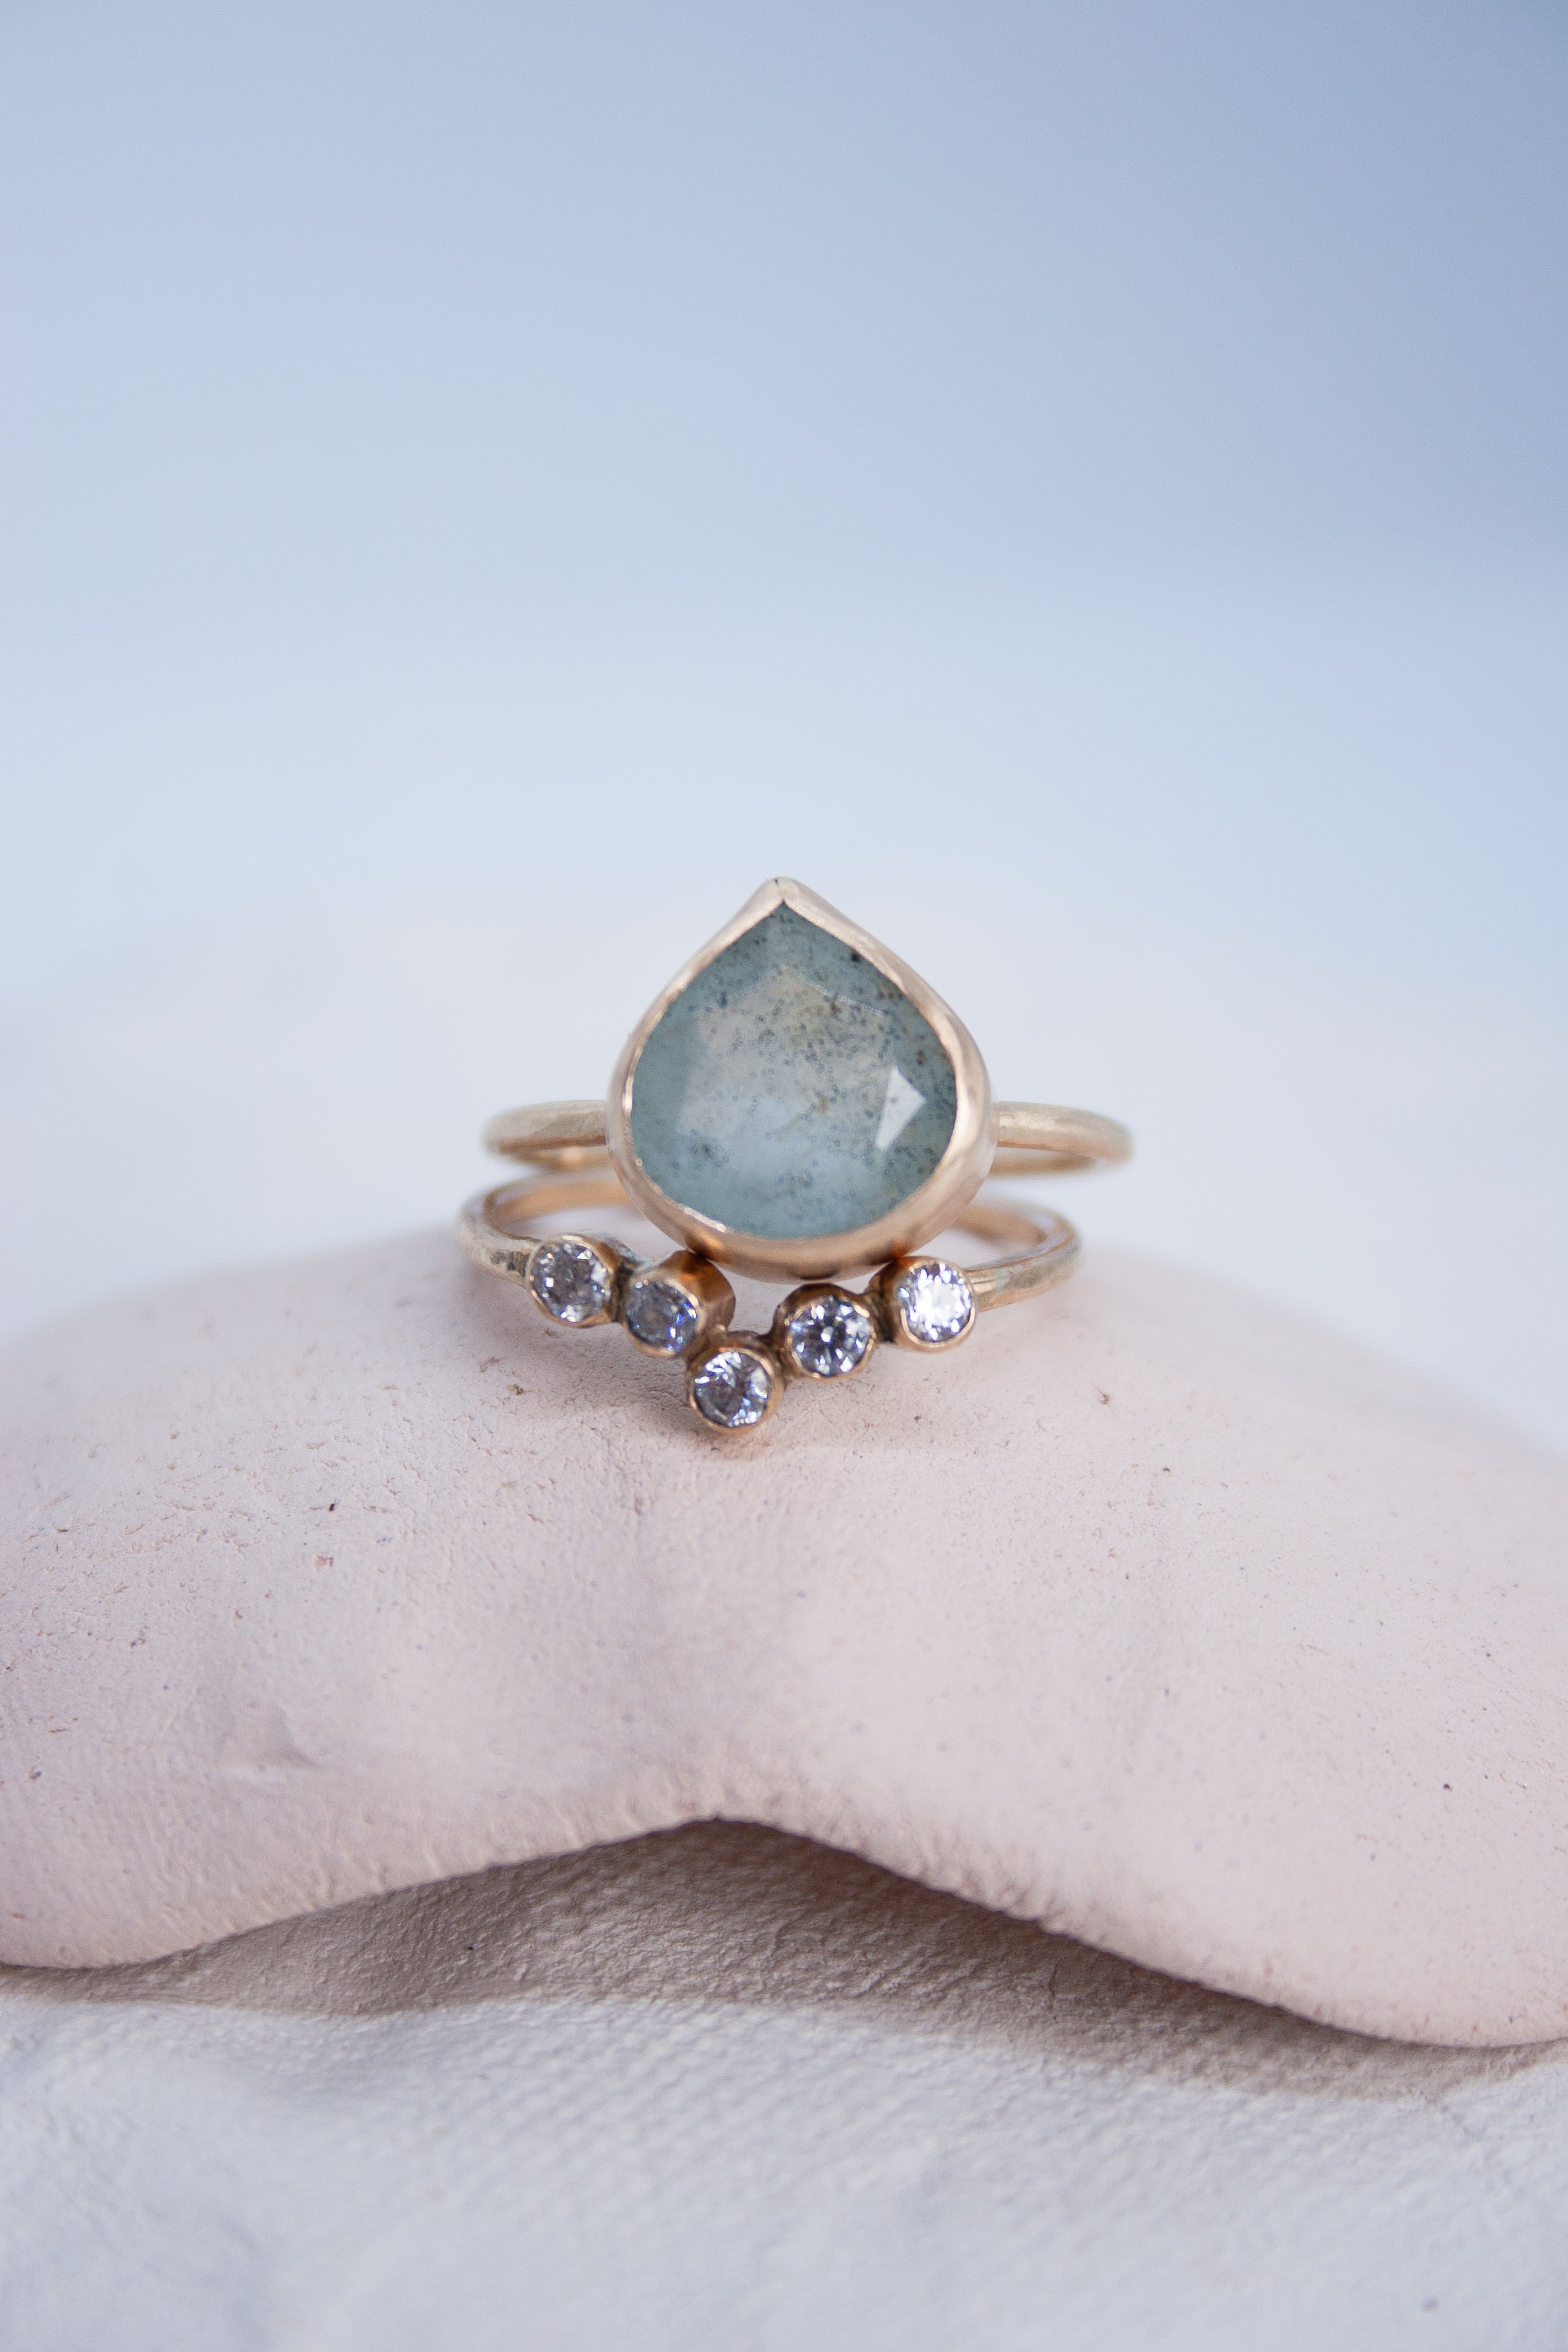 Bespoke diamond engagement ring by Tide & Trove